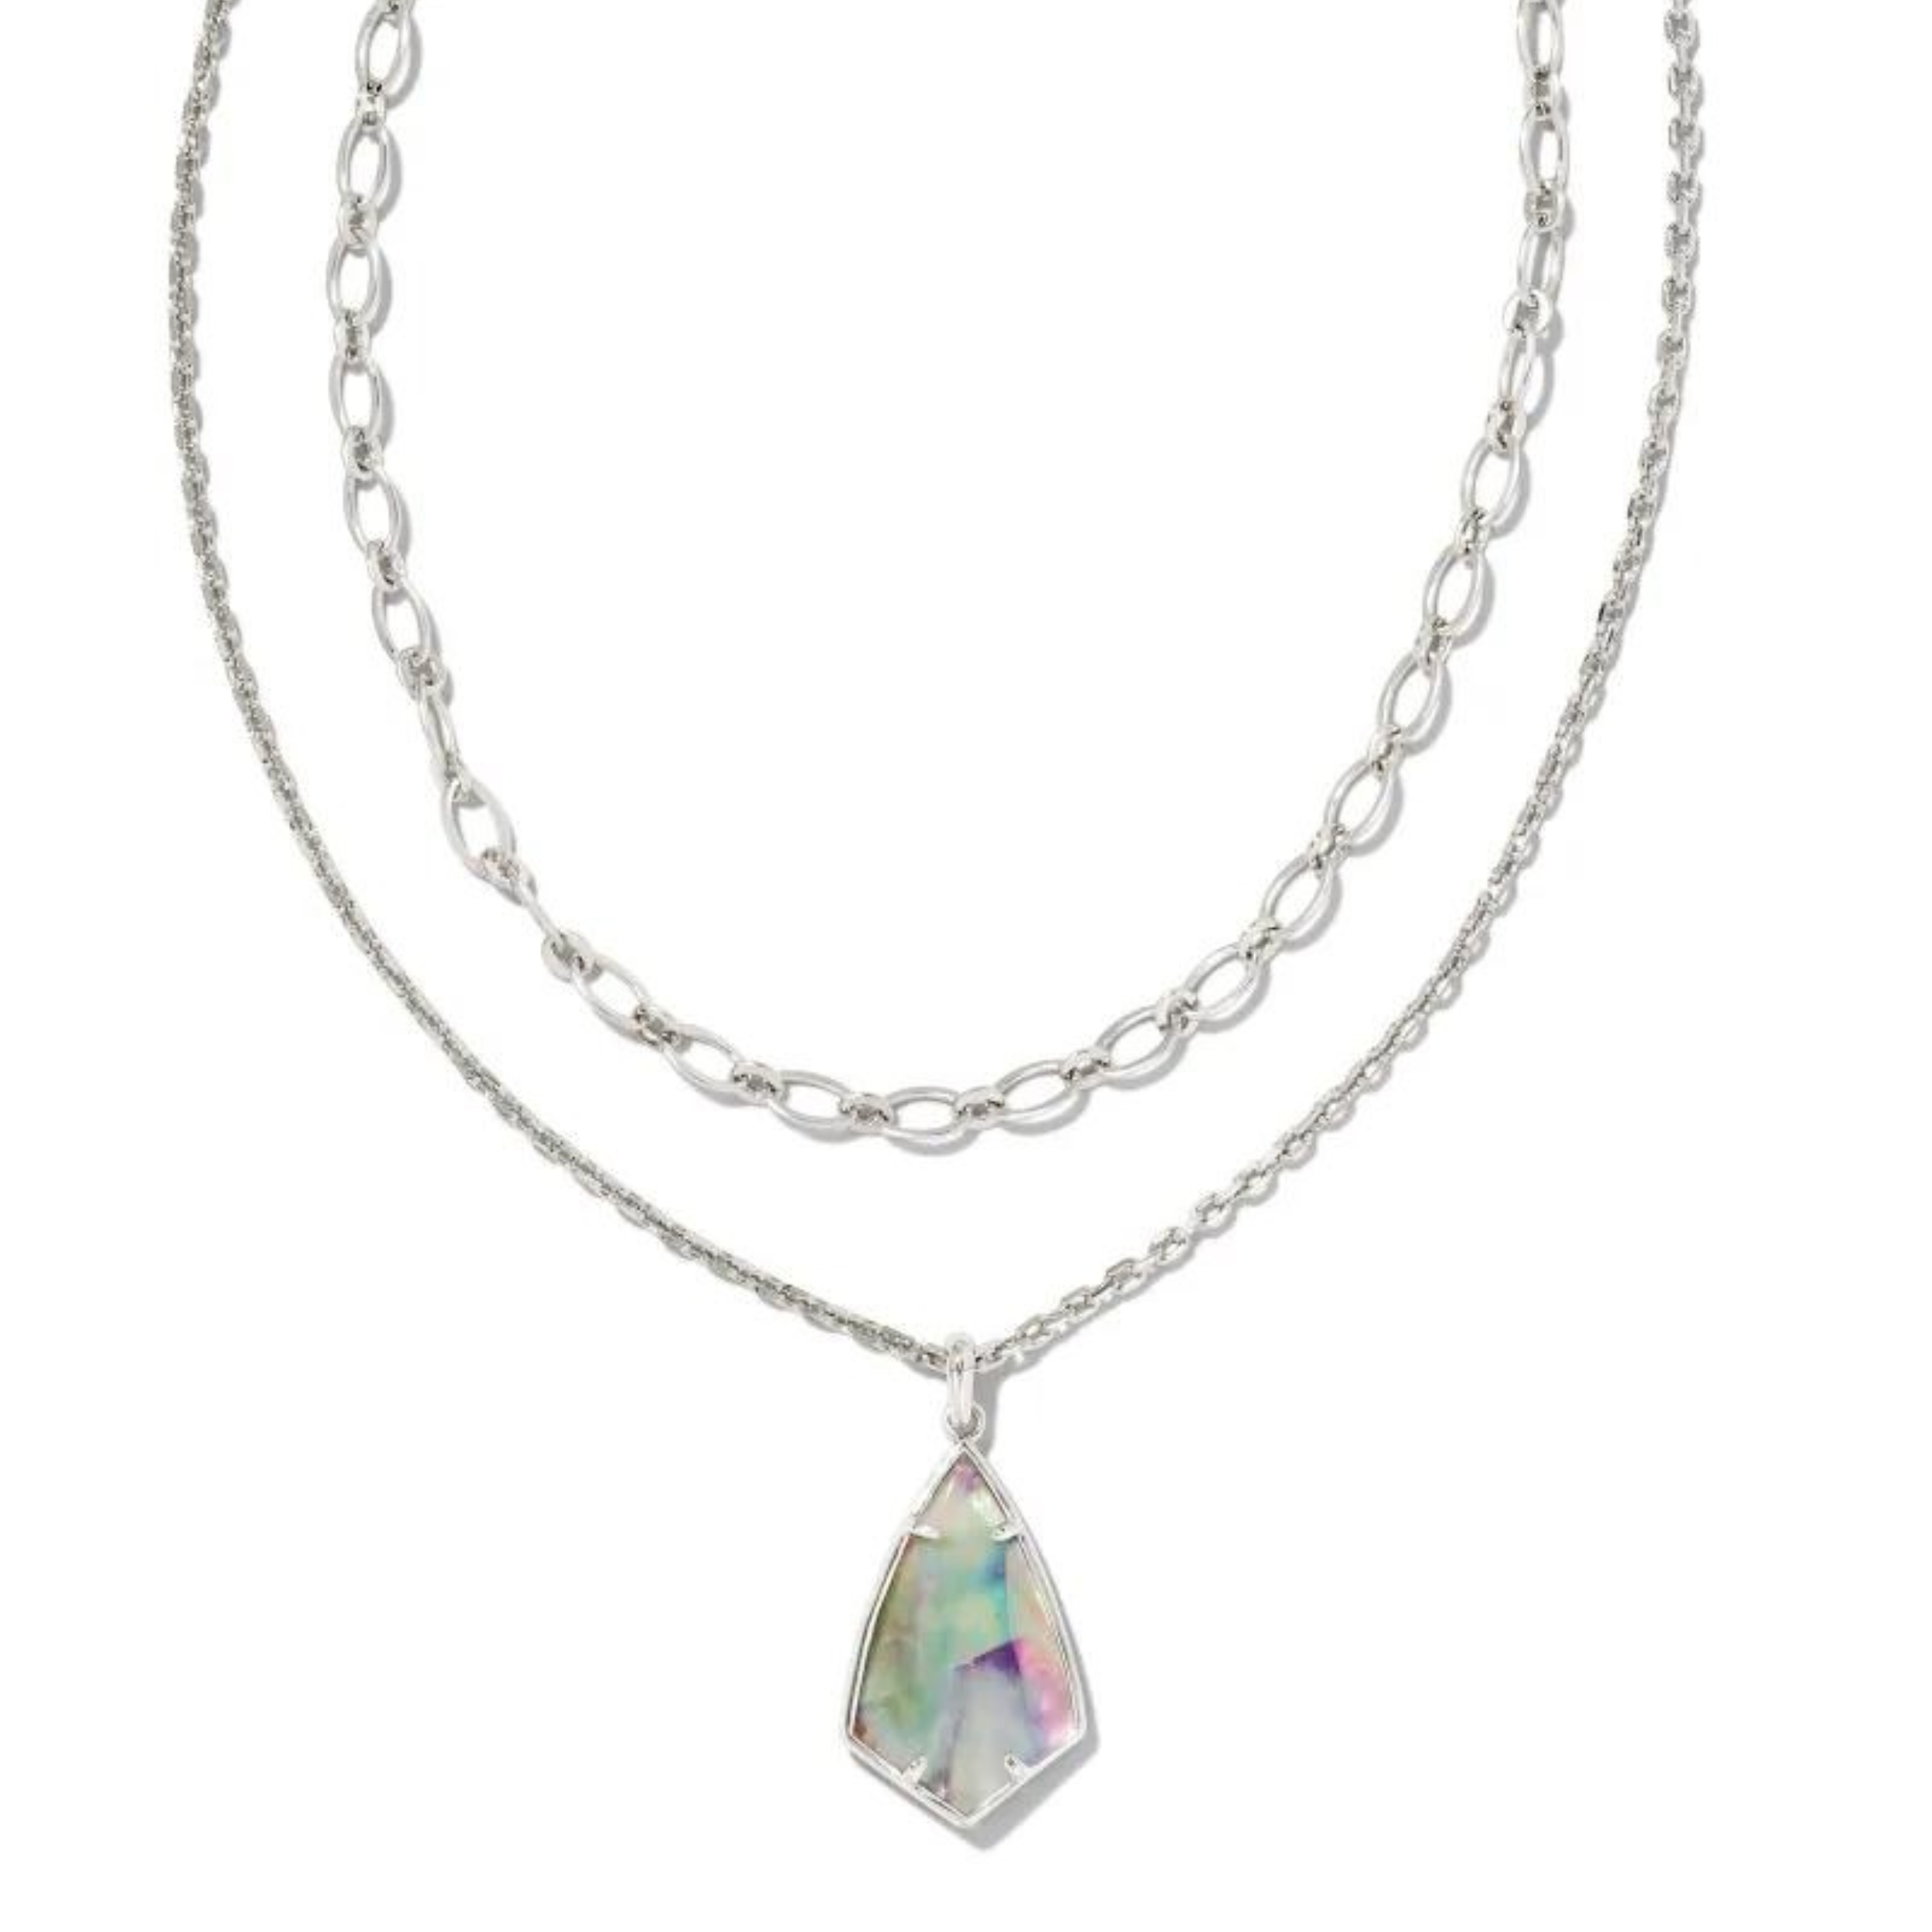 Silver multi strand necklace with a lilac abalone pendant, pictured on a white background.